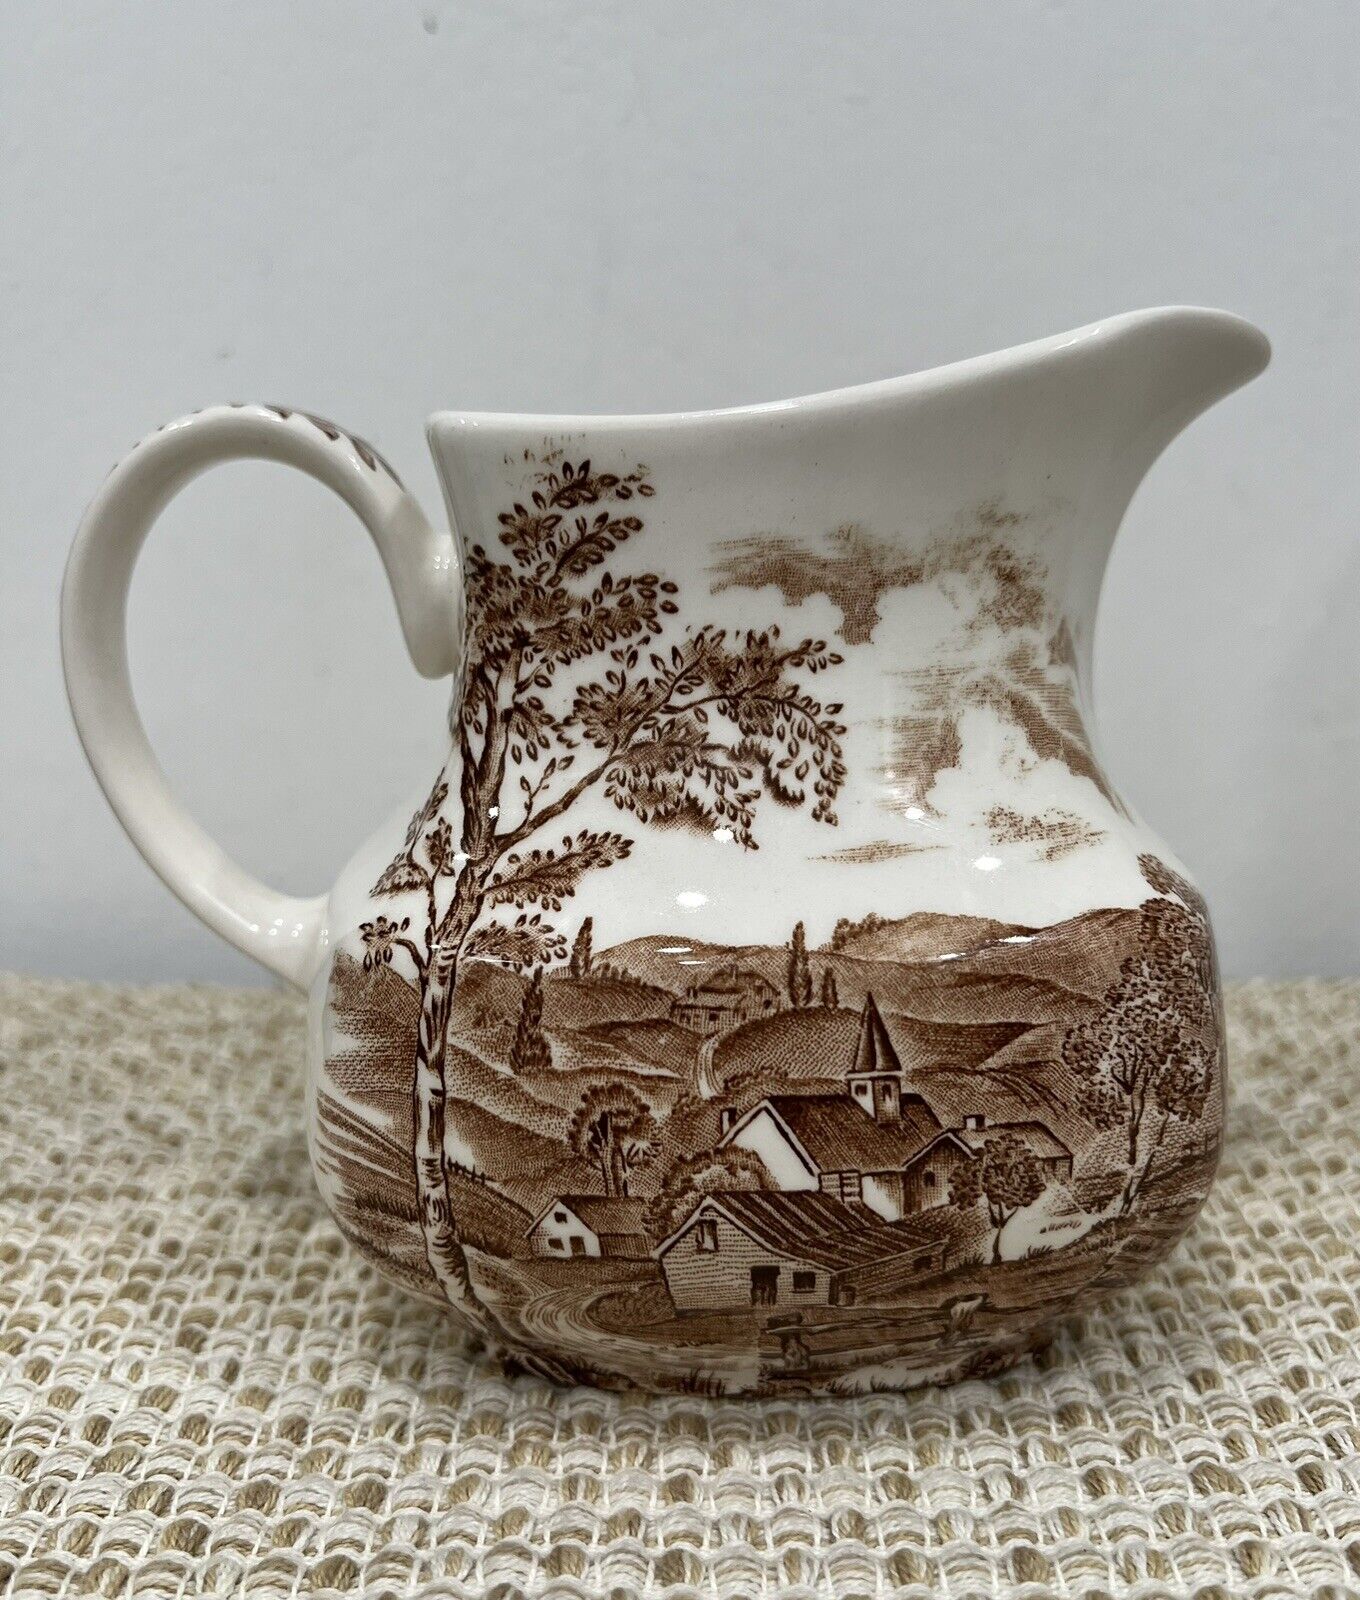 Reverie Pitcher/Creamer by Alfred Meakin Staffordshire, England 5” Height